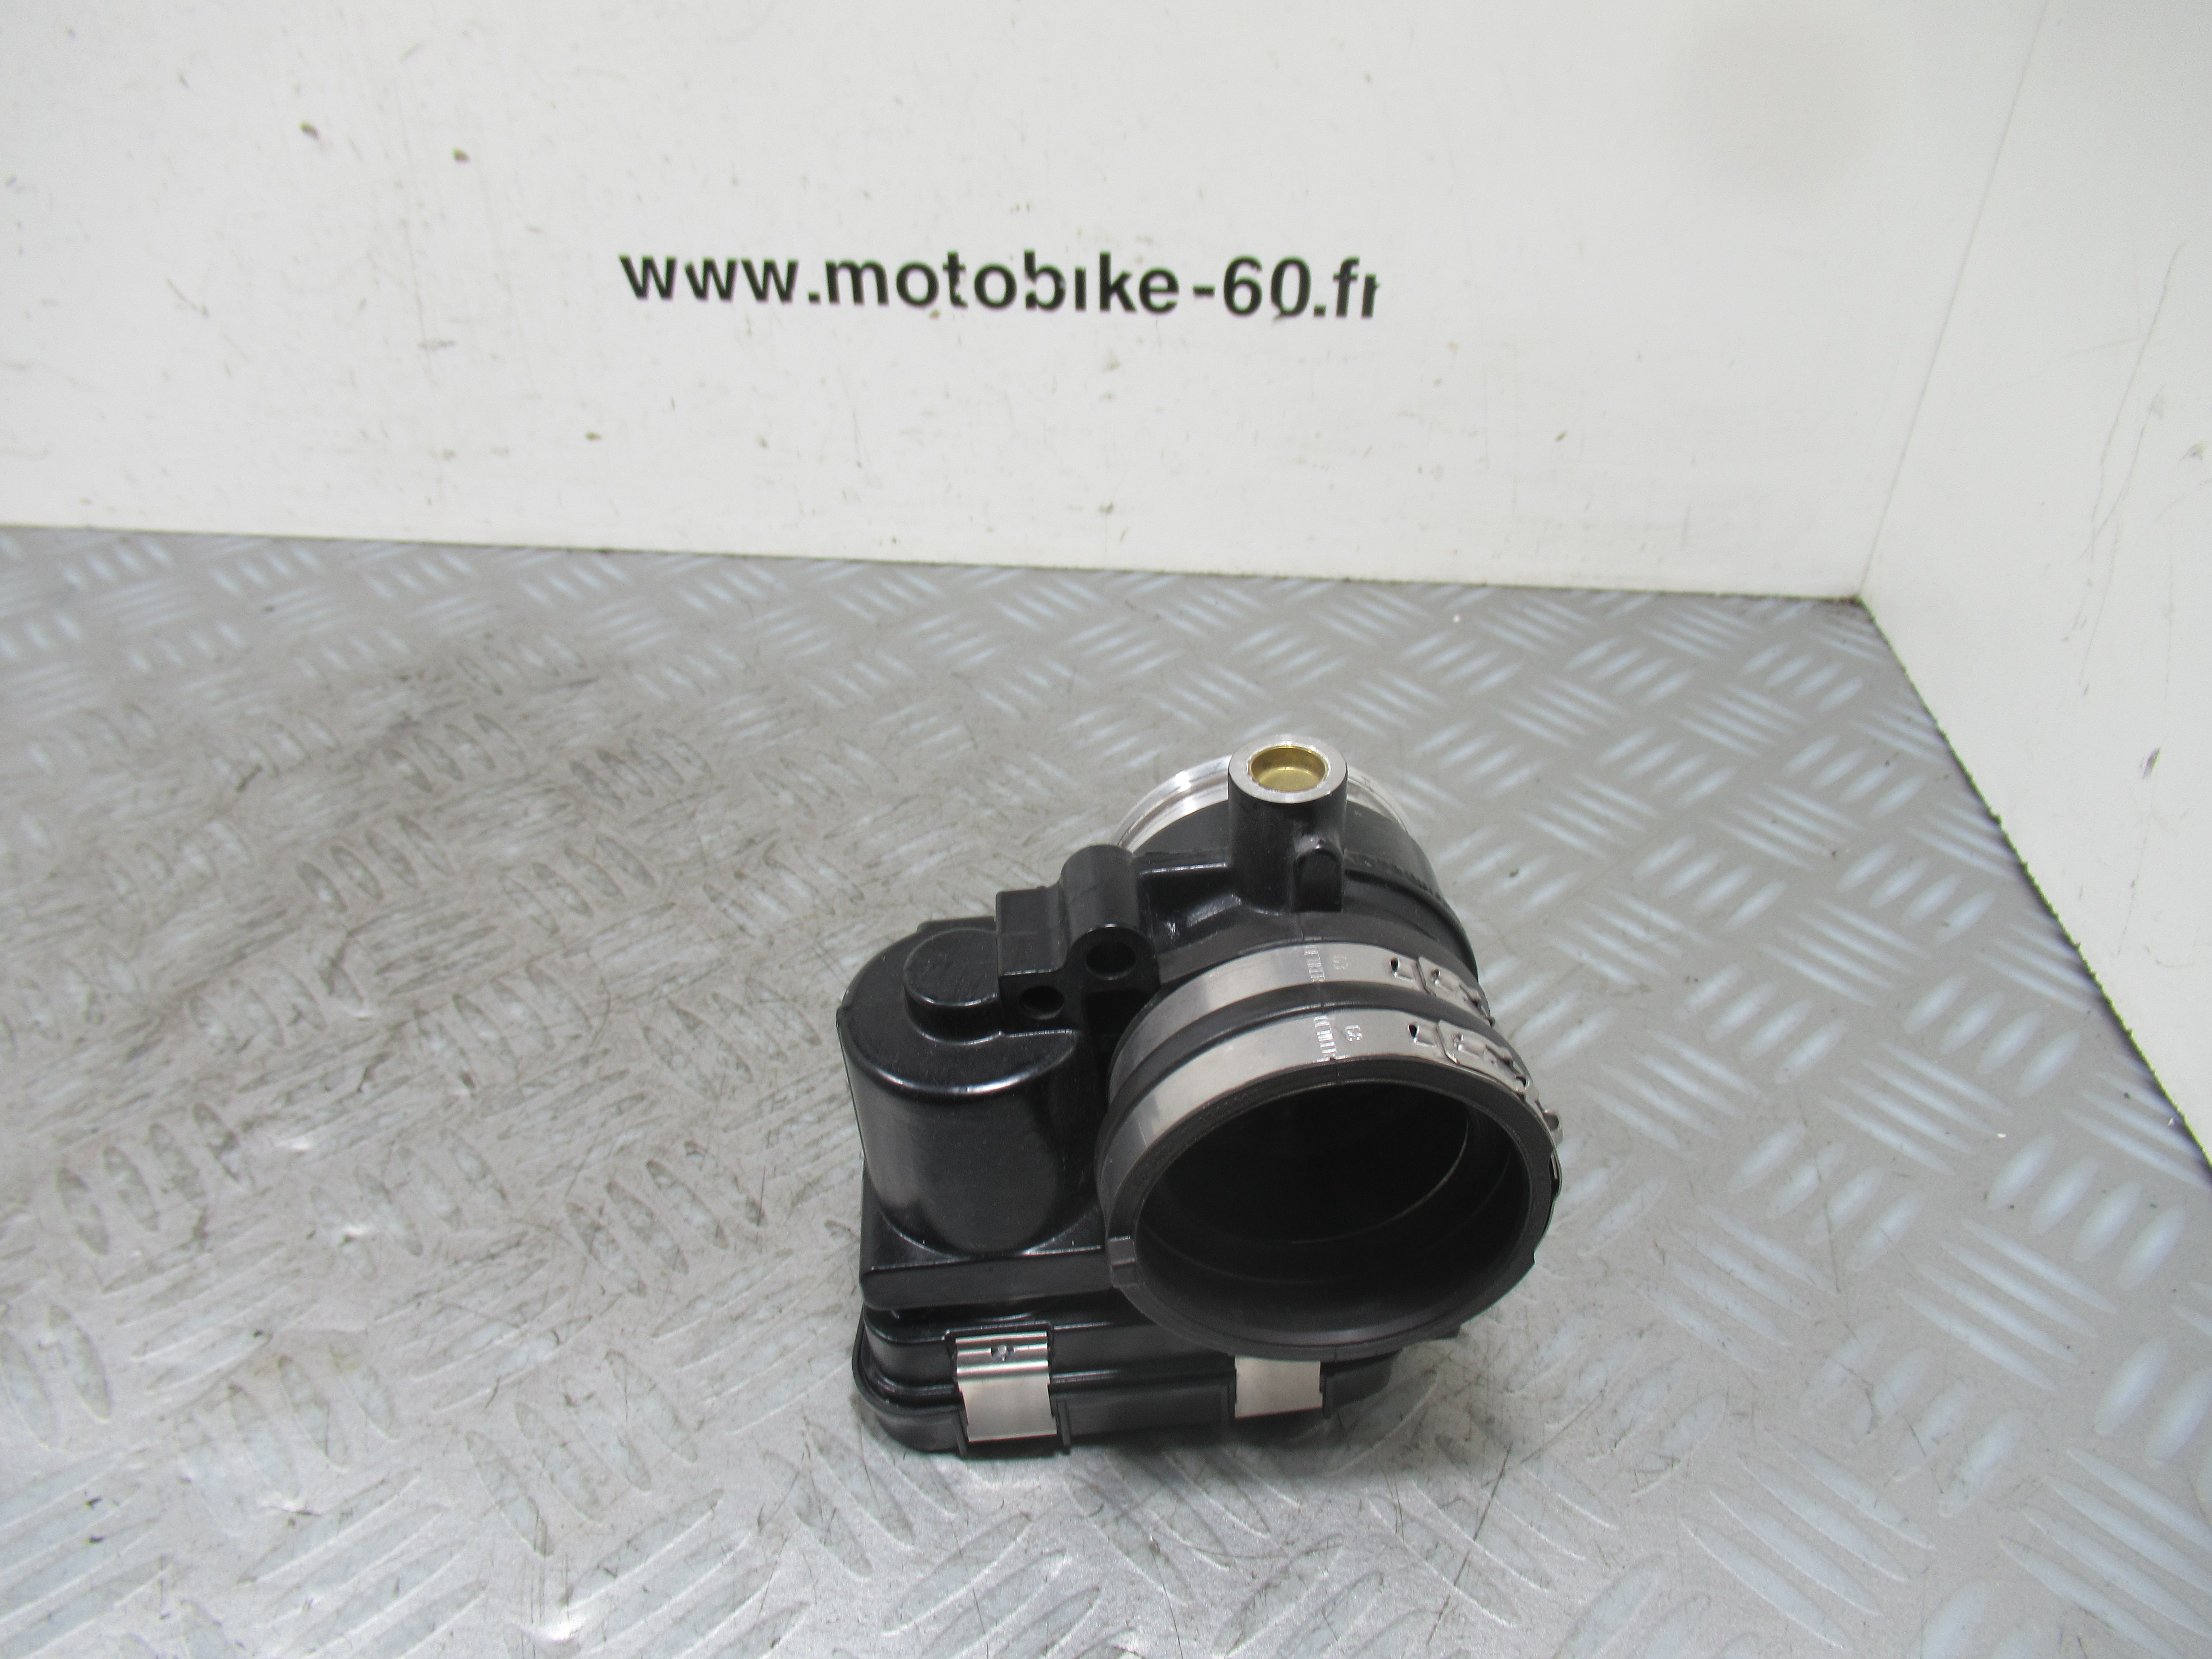 Corps injection BMW R 1250 GS Adventure 4t (8568757)